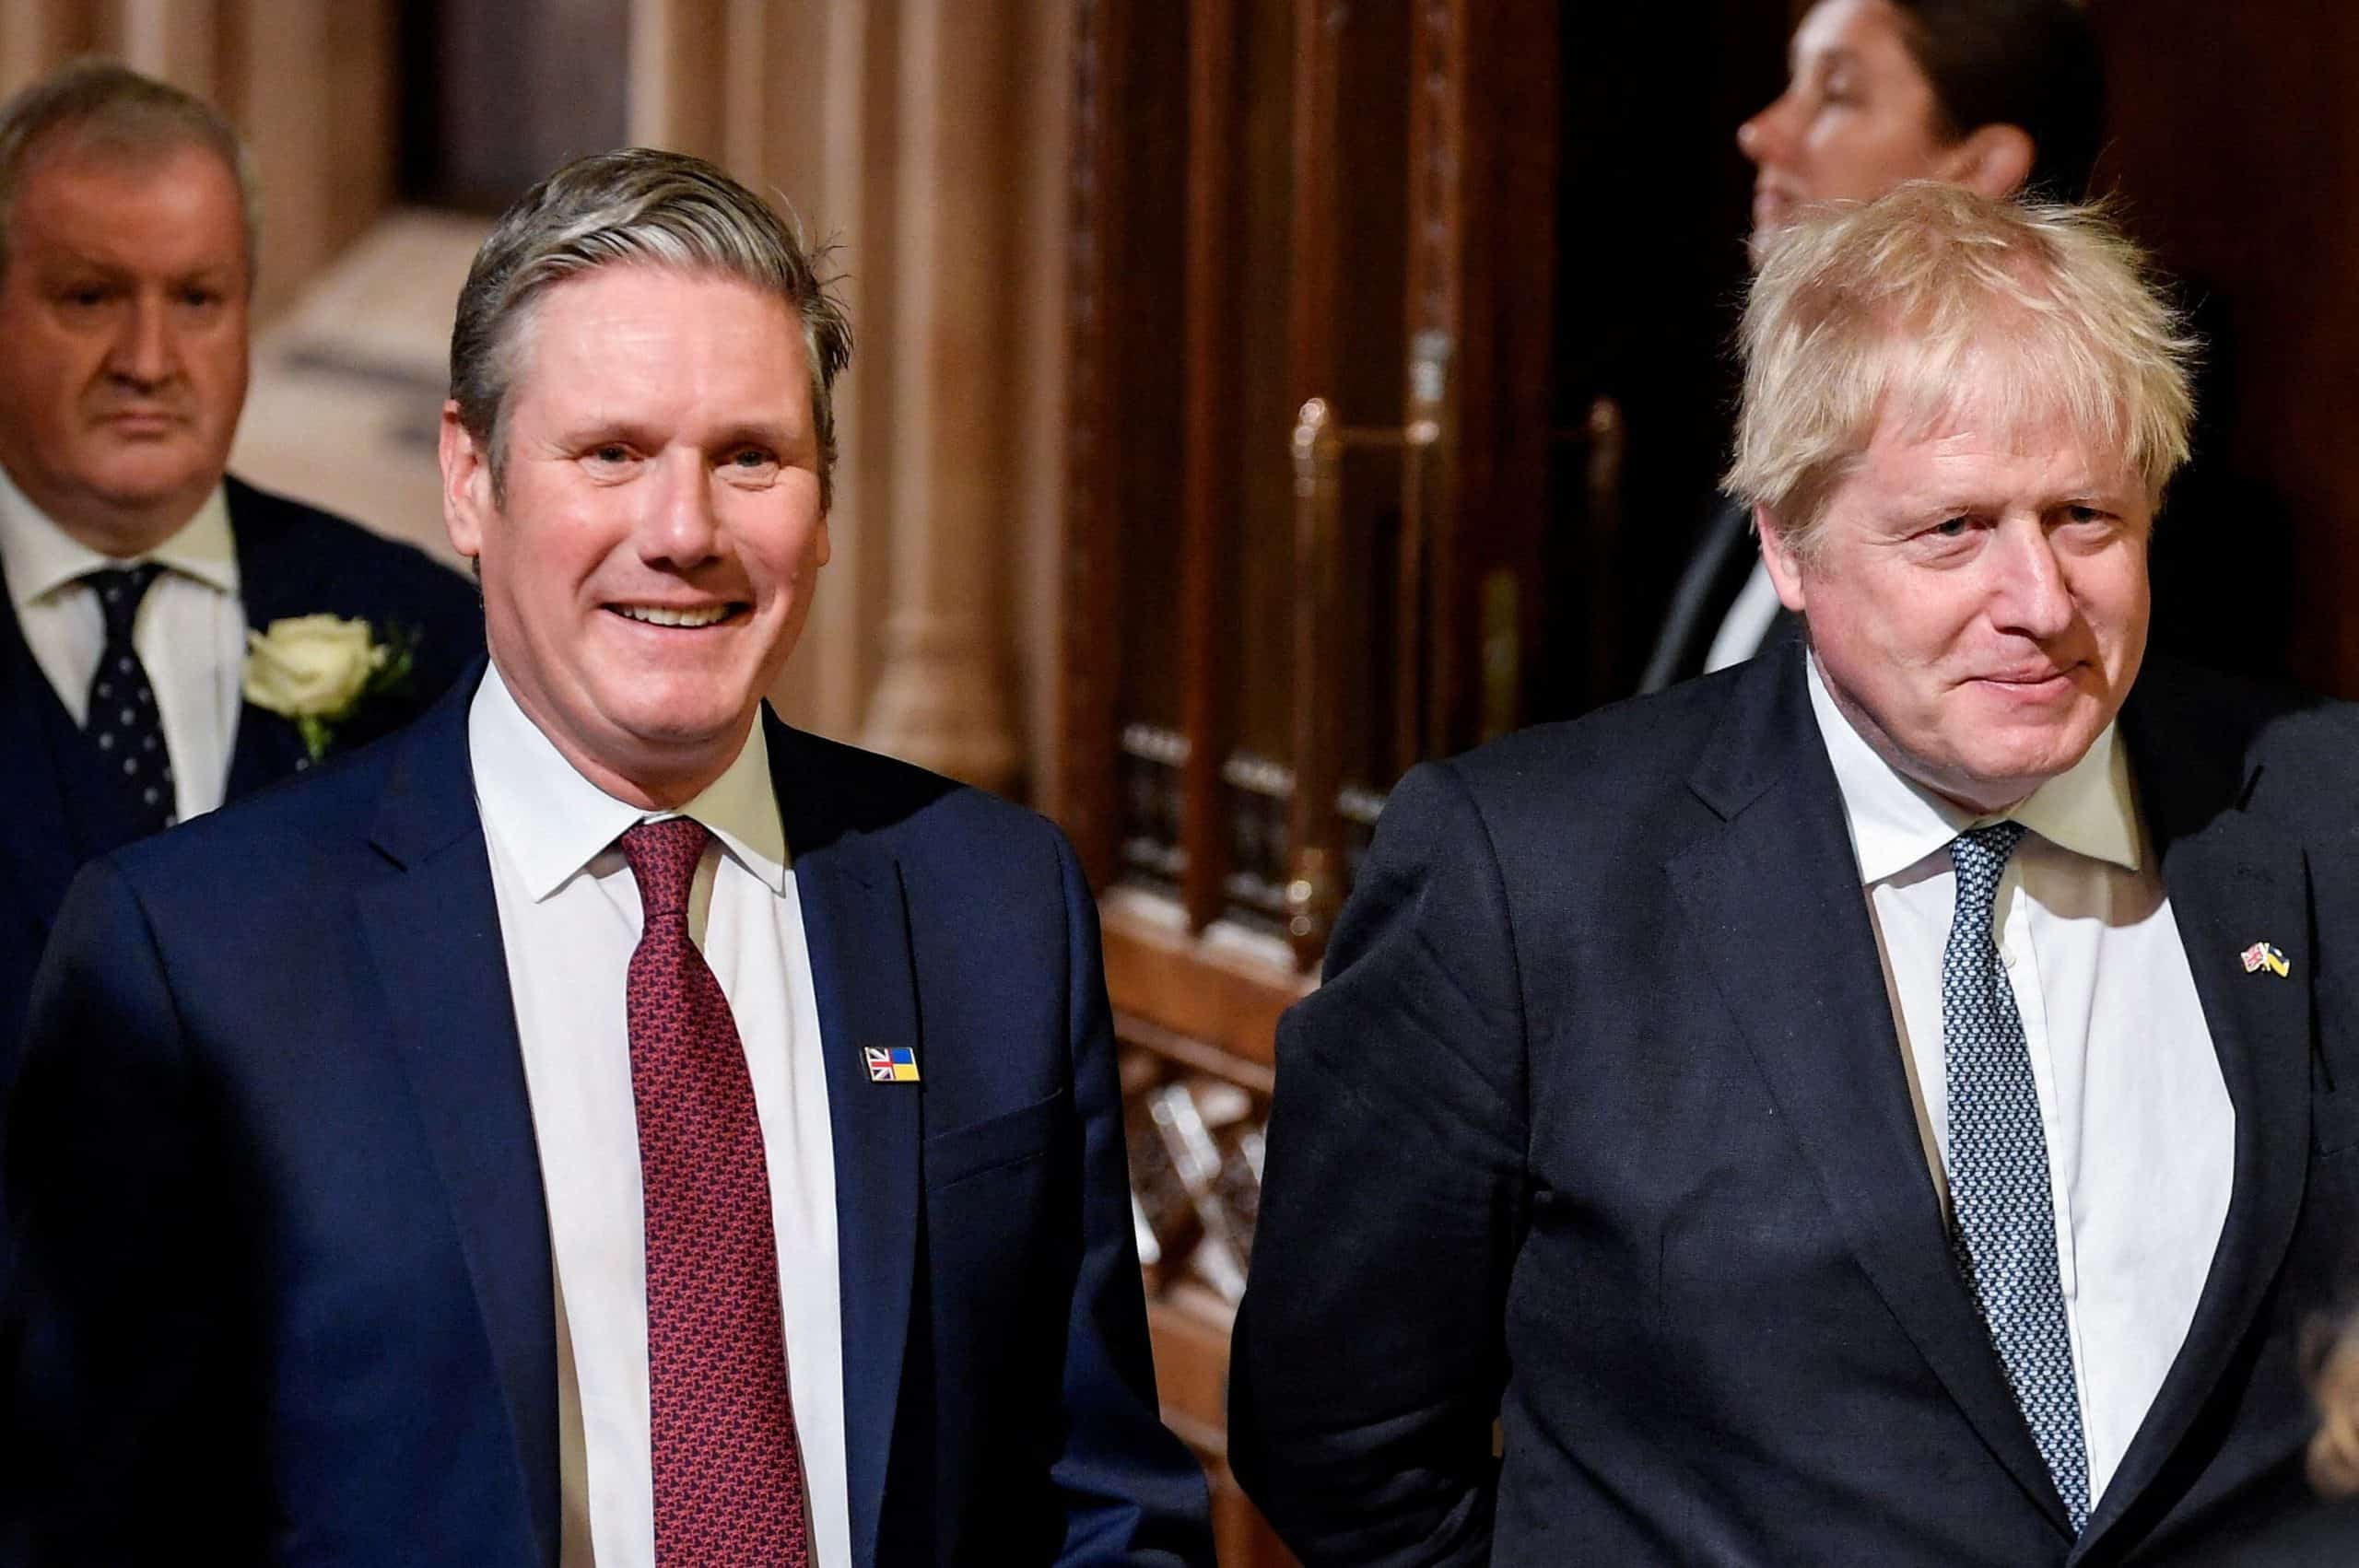 Labour lurches to the right as Starmer puts immigration in spotlight